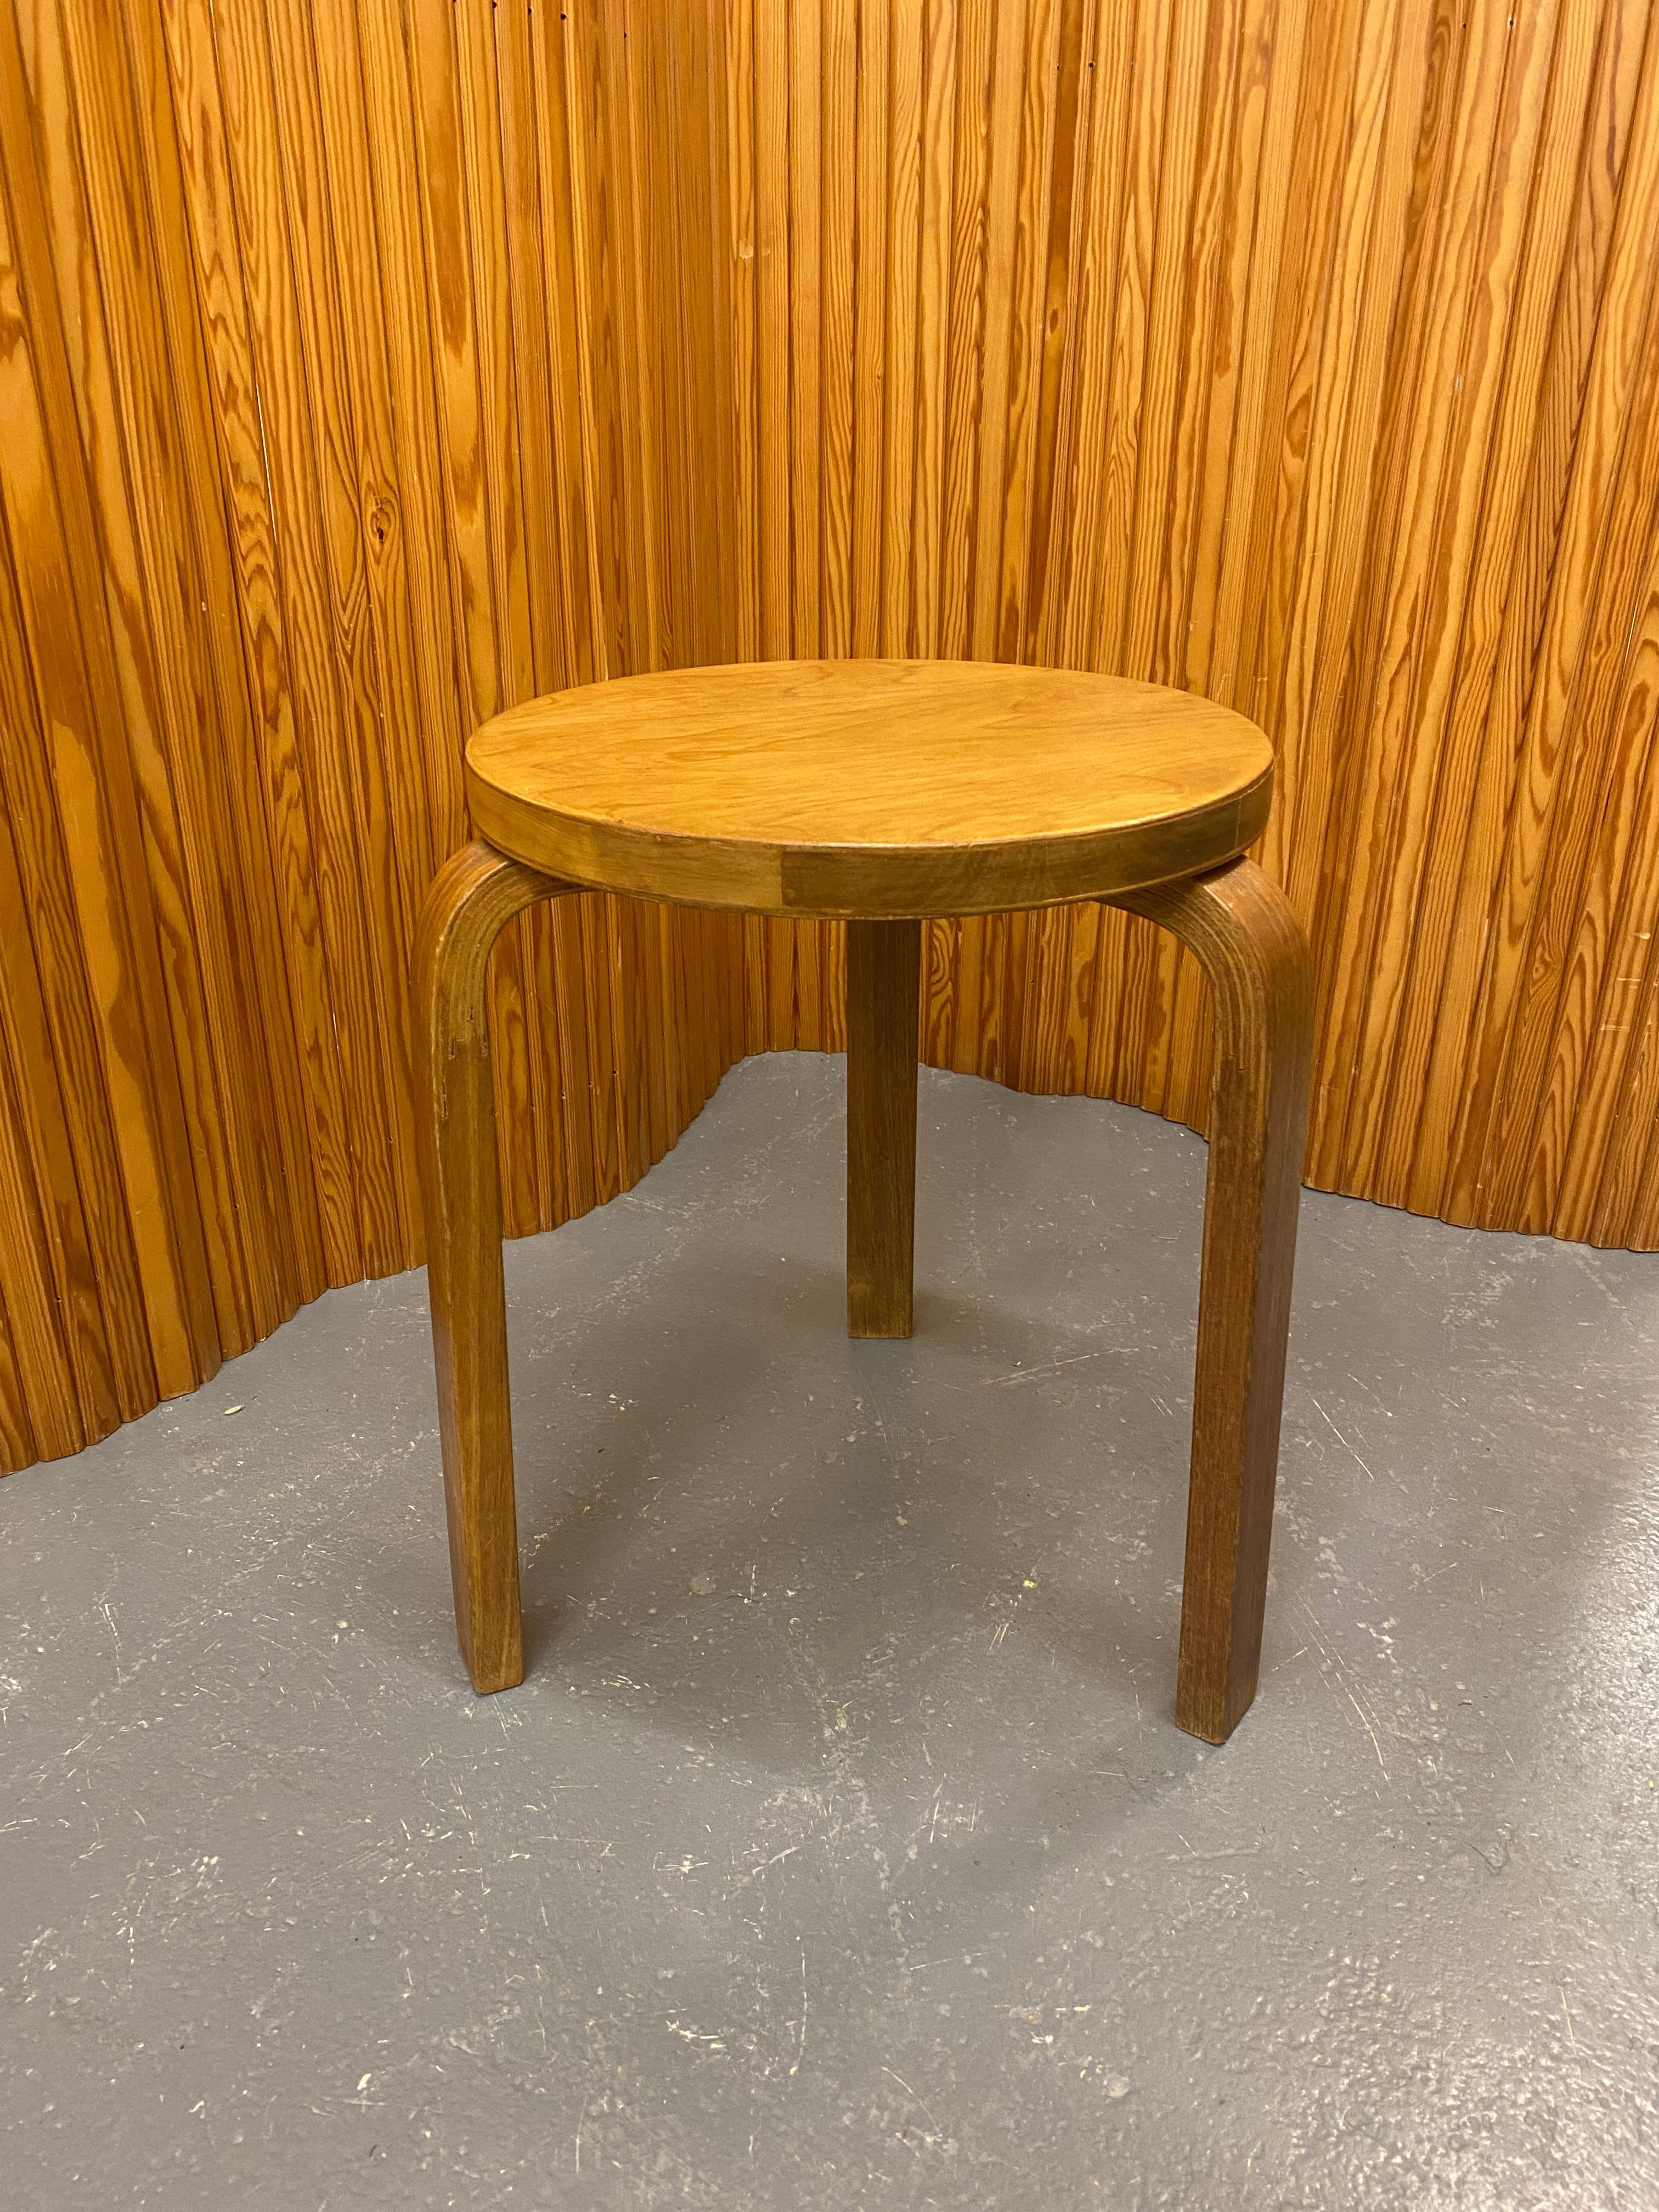 Artek stool in birch and beautiful dark patina, designed by Alvar Aalto and manufactured by Artek in the 1950s. The model 60 stool is perhaps the most well known Aalto design and has always been attractive to people. As with a lot of Alvar Aalto's